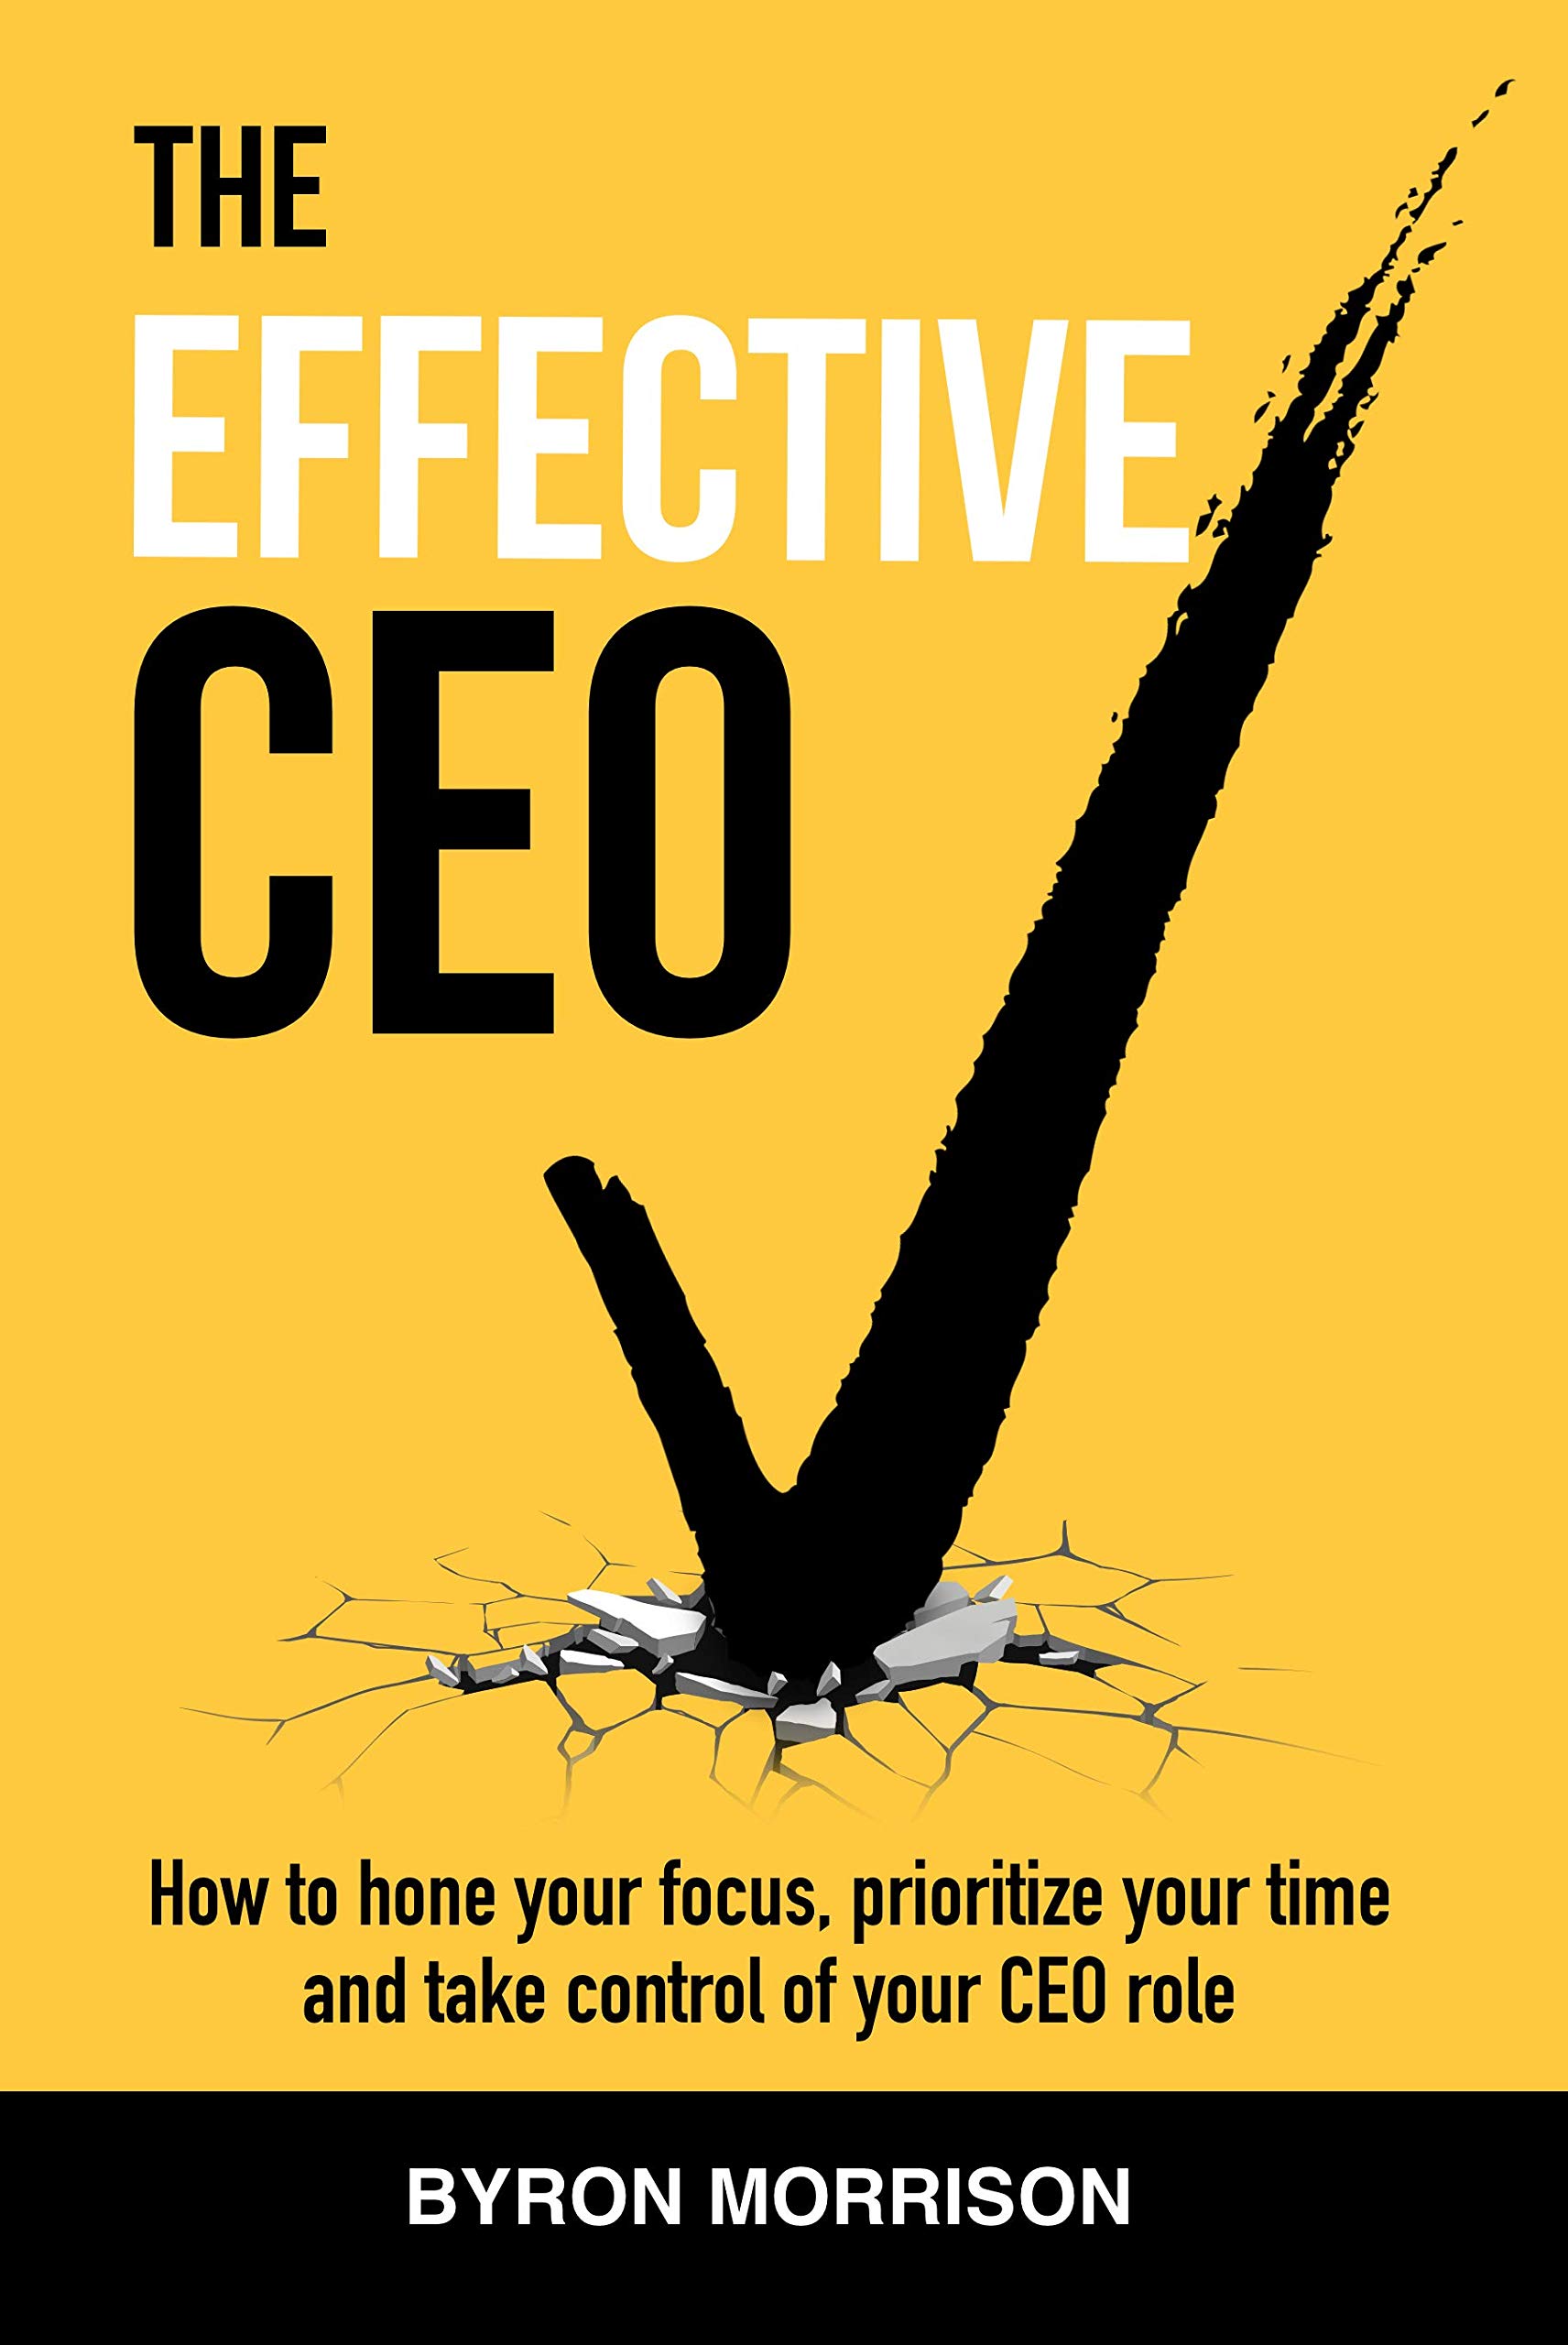 The Effective CEO